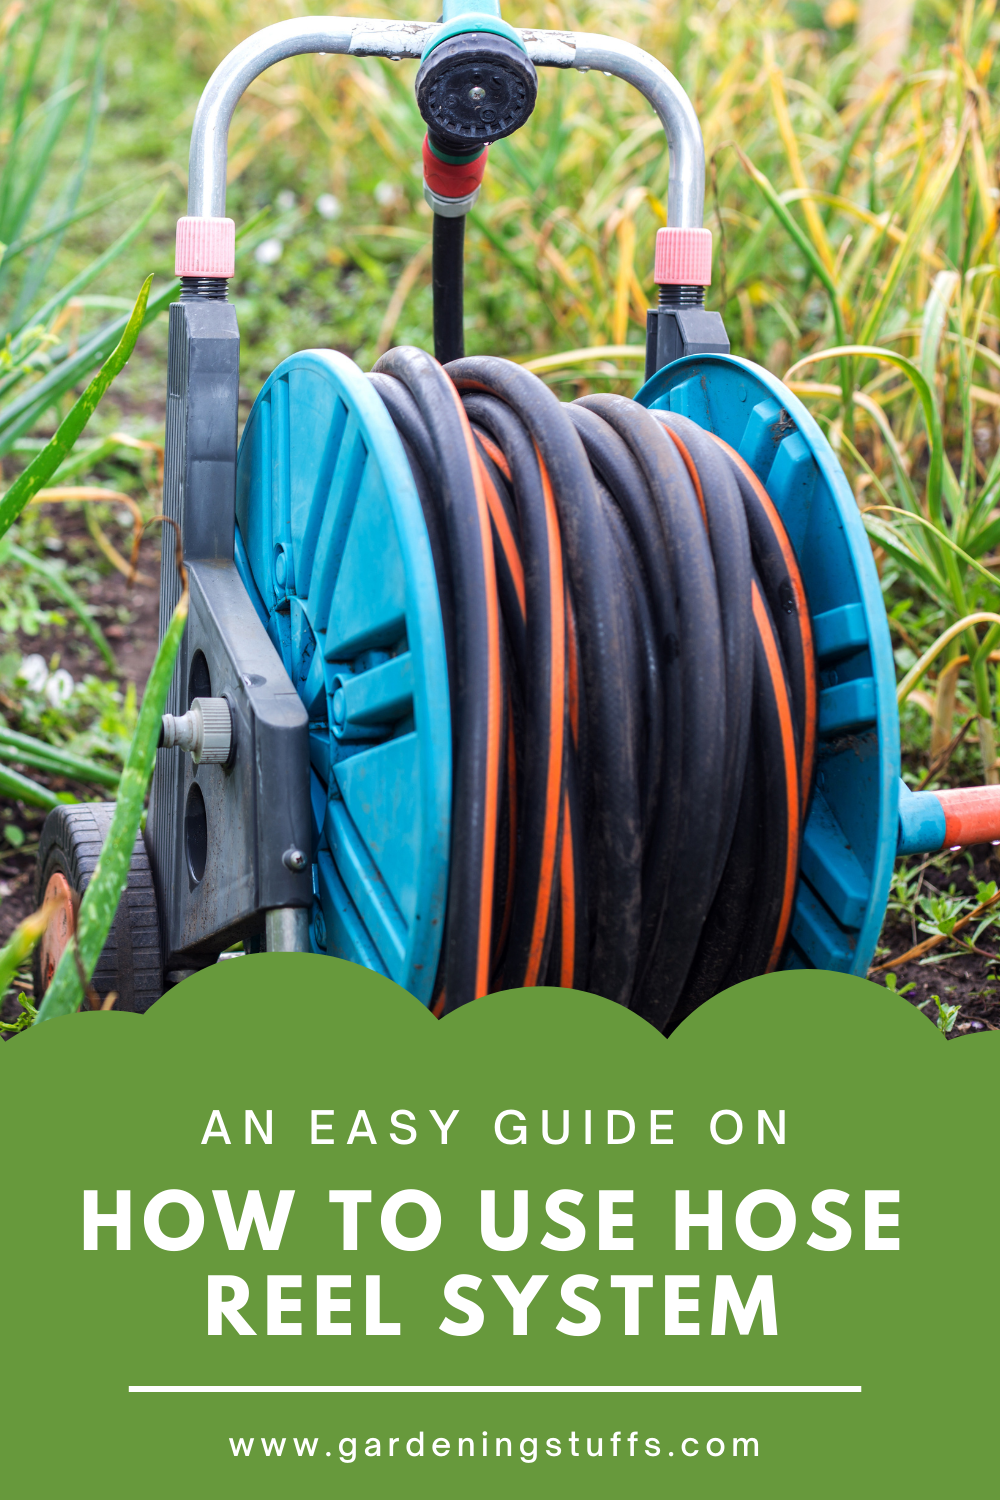 The advantage of the hose reels is that the hose can be wrapped with just the force of water. This not only saves time but it also saves a lot of efforts. It is quite easy to use such systems. Read on to know the procedure to use the system properly.